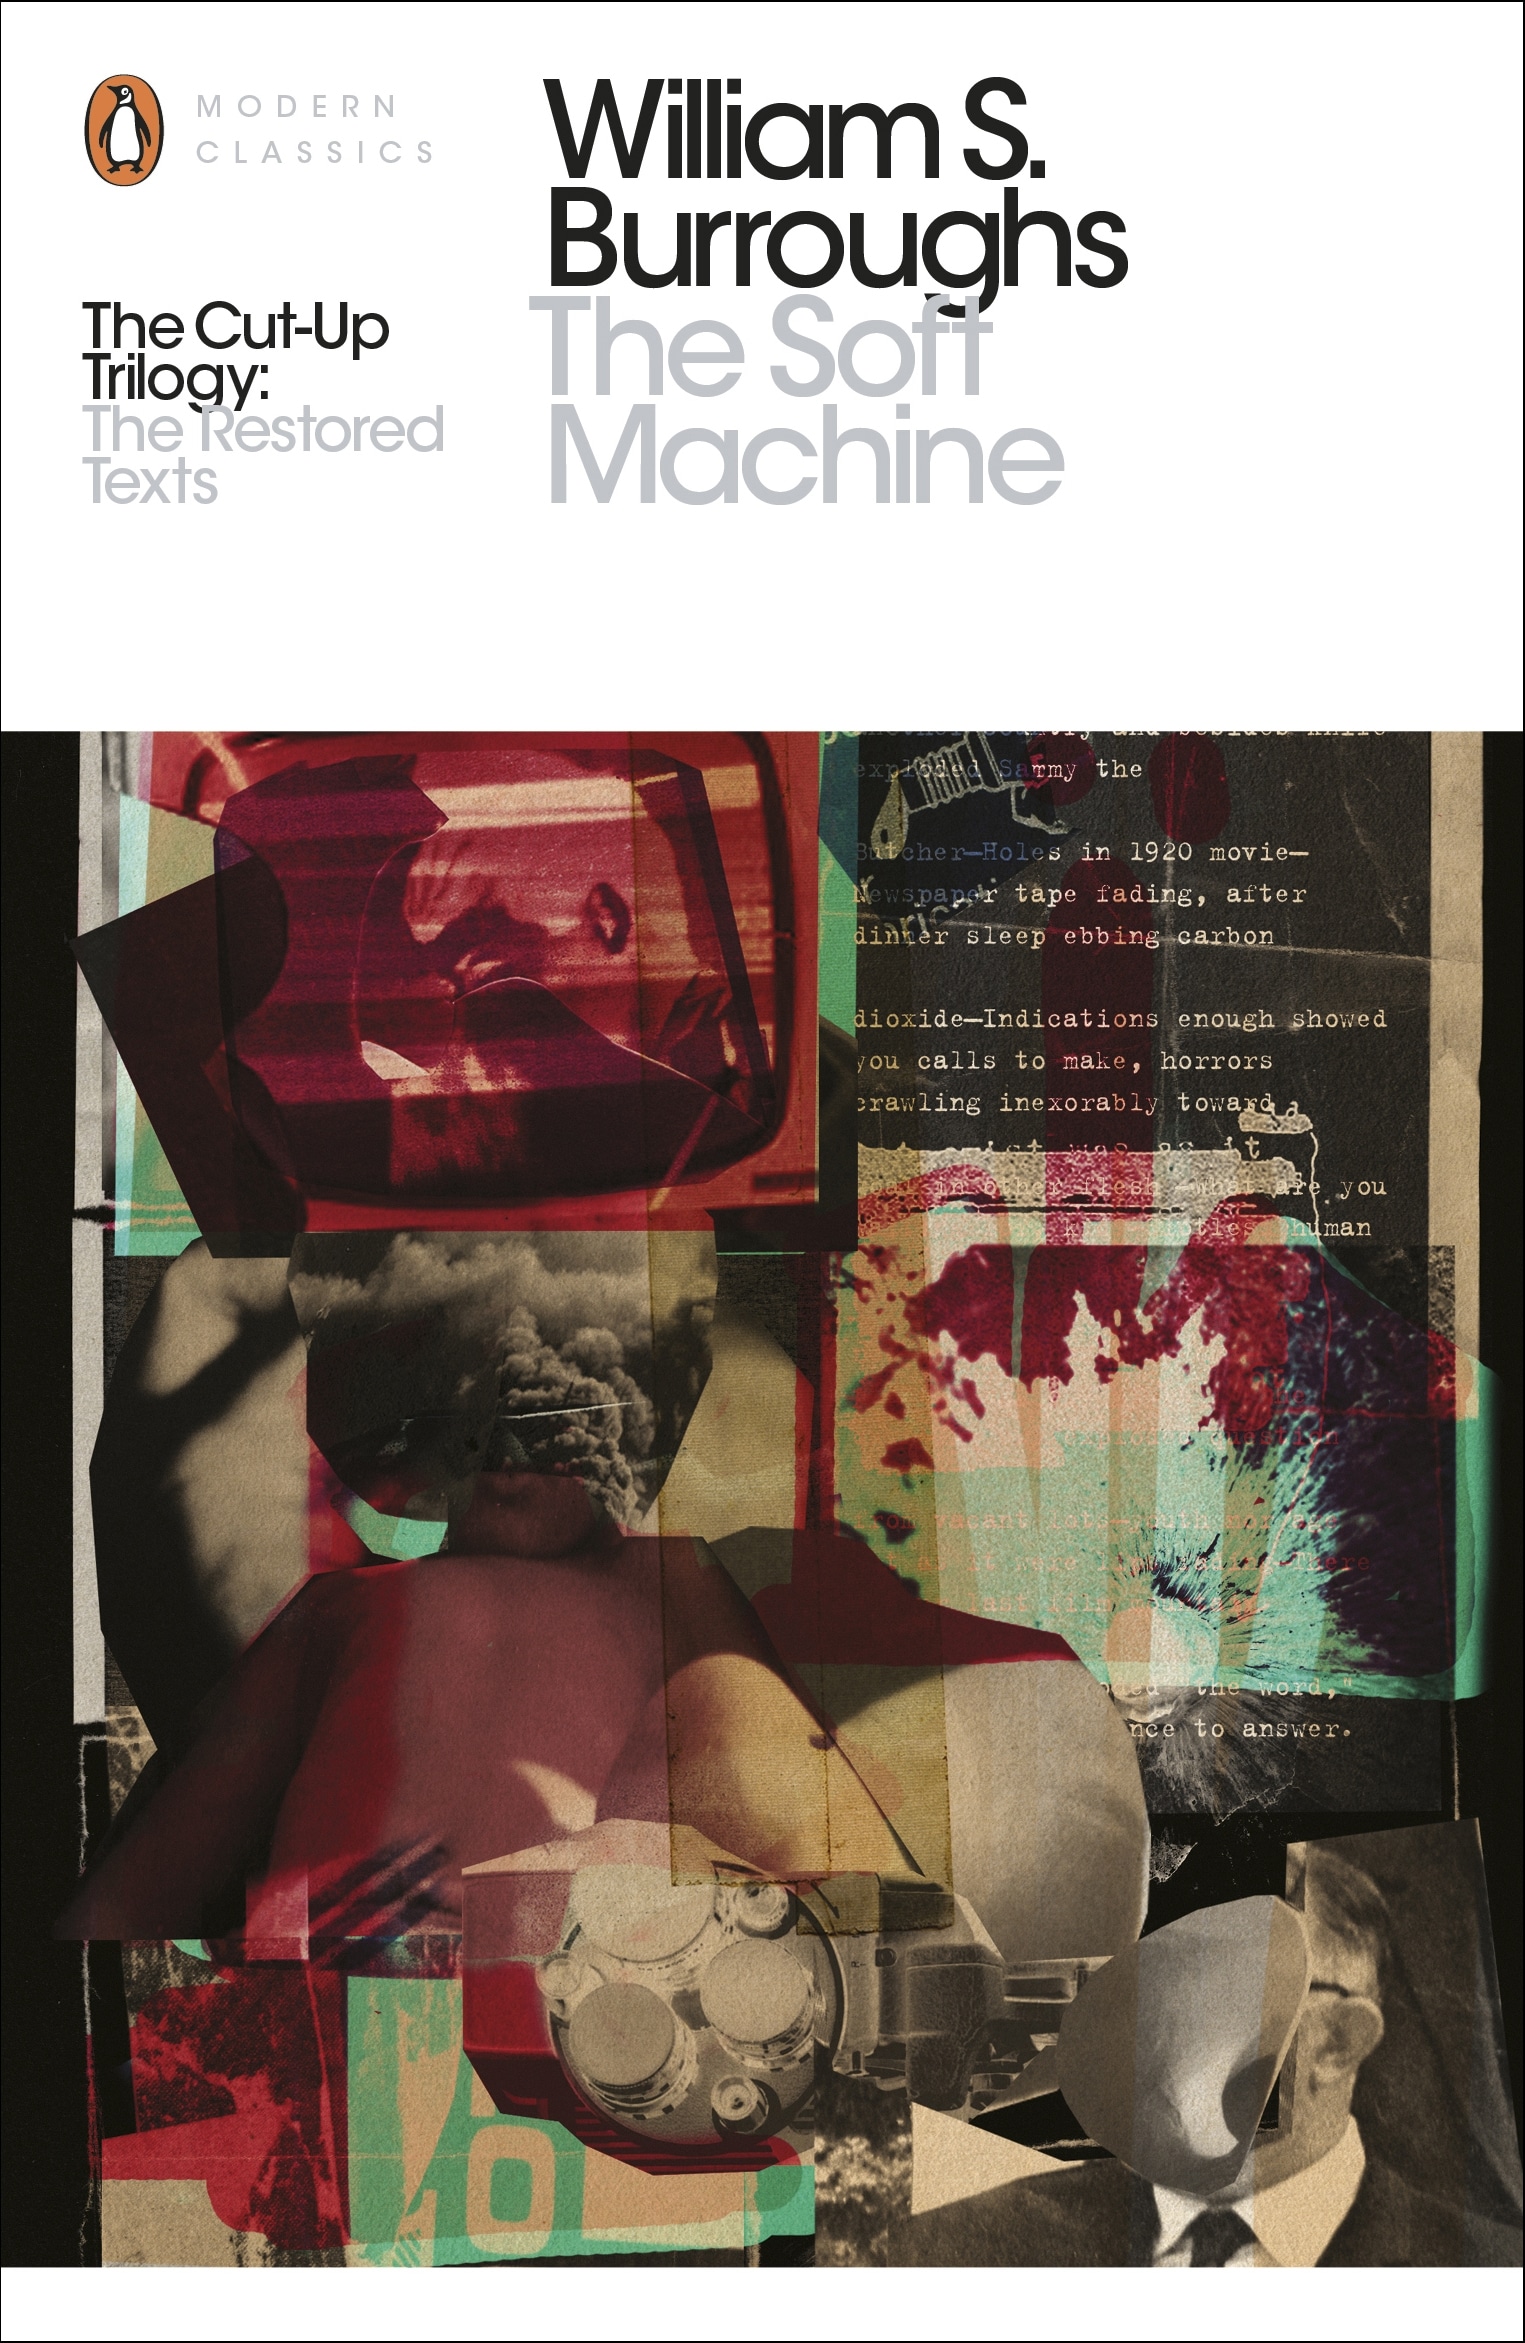 Book “The Soft Machine” by William S. Burroughs, Oliver Harris — April 22, 2014